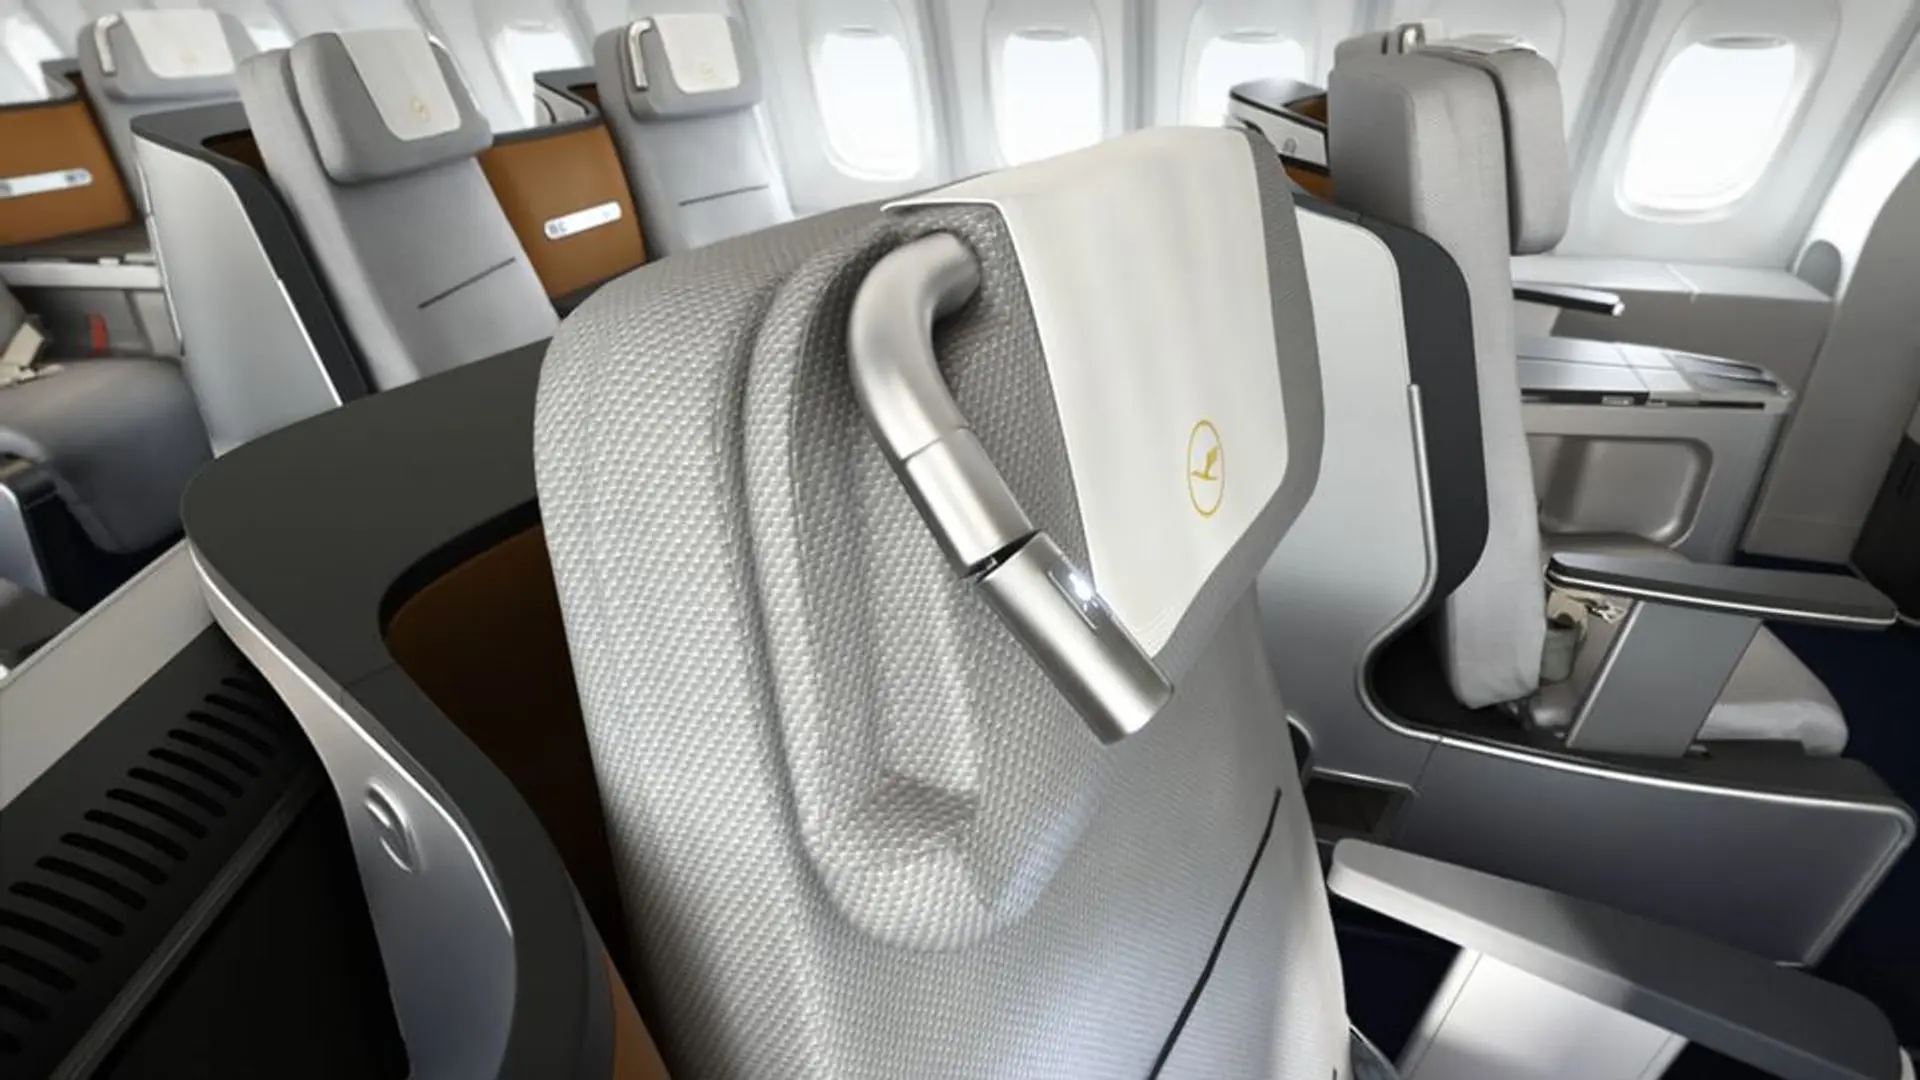 Airline review Cabin & Seat - Lufthansa - 3